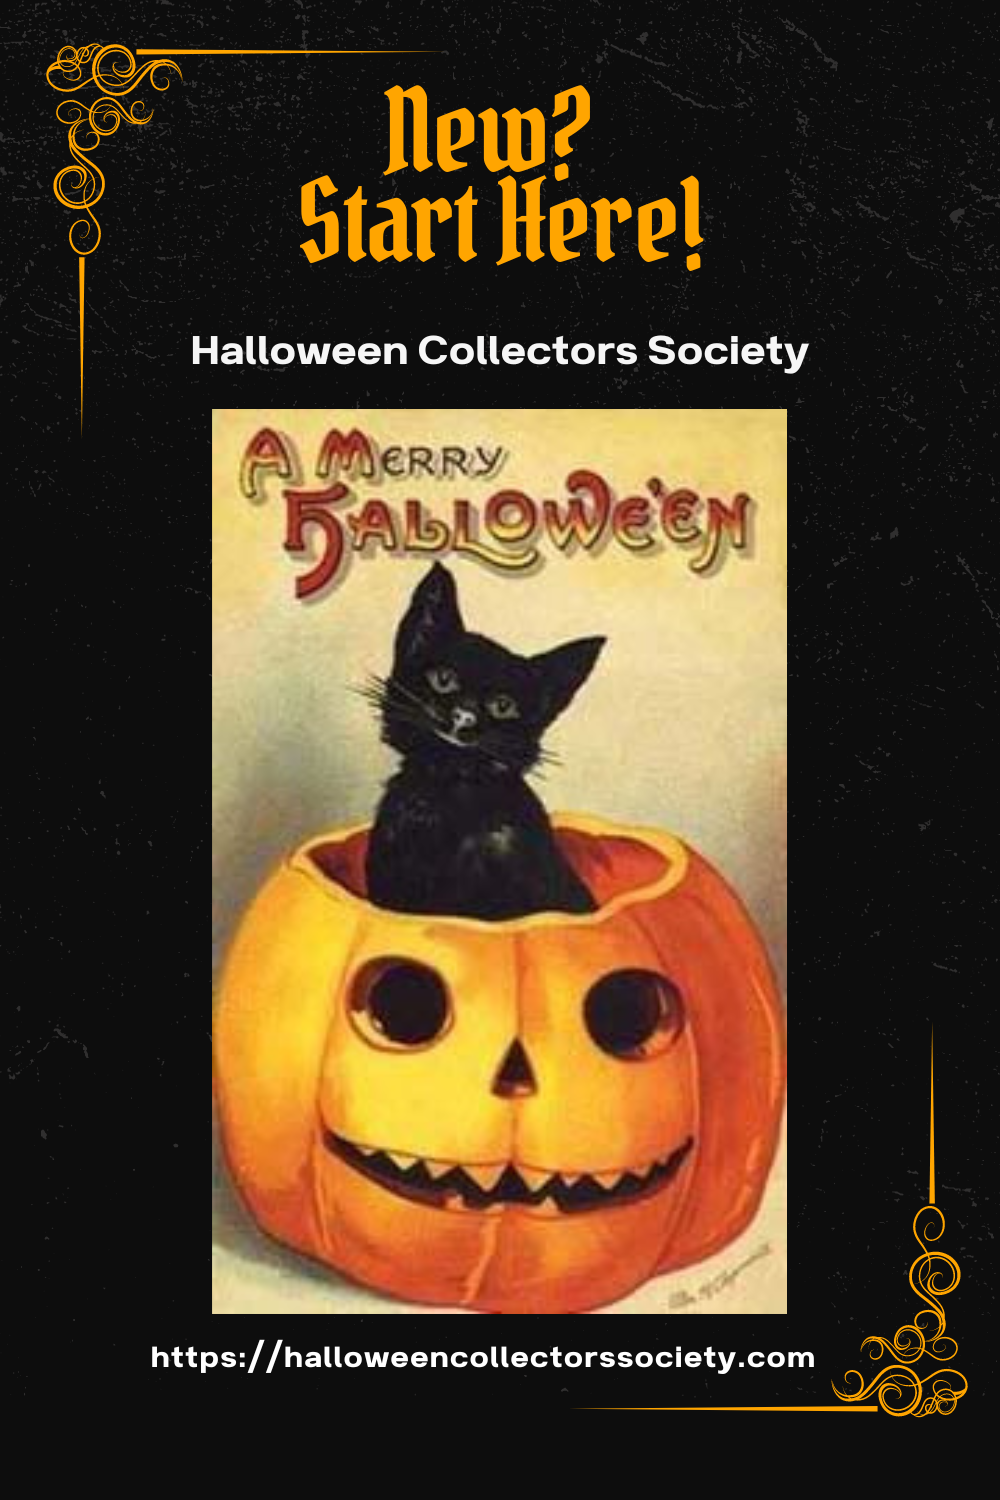 A halloween postcard image with a black cat in a pumpkin.